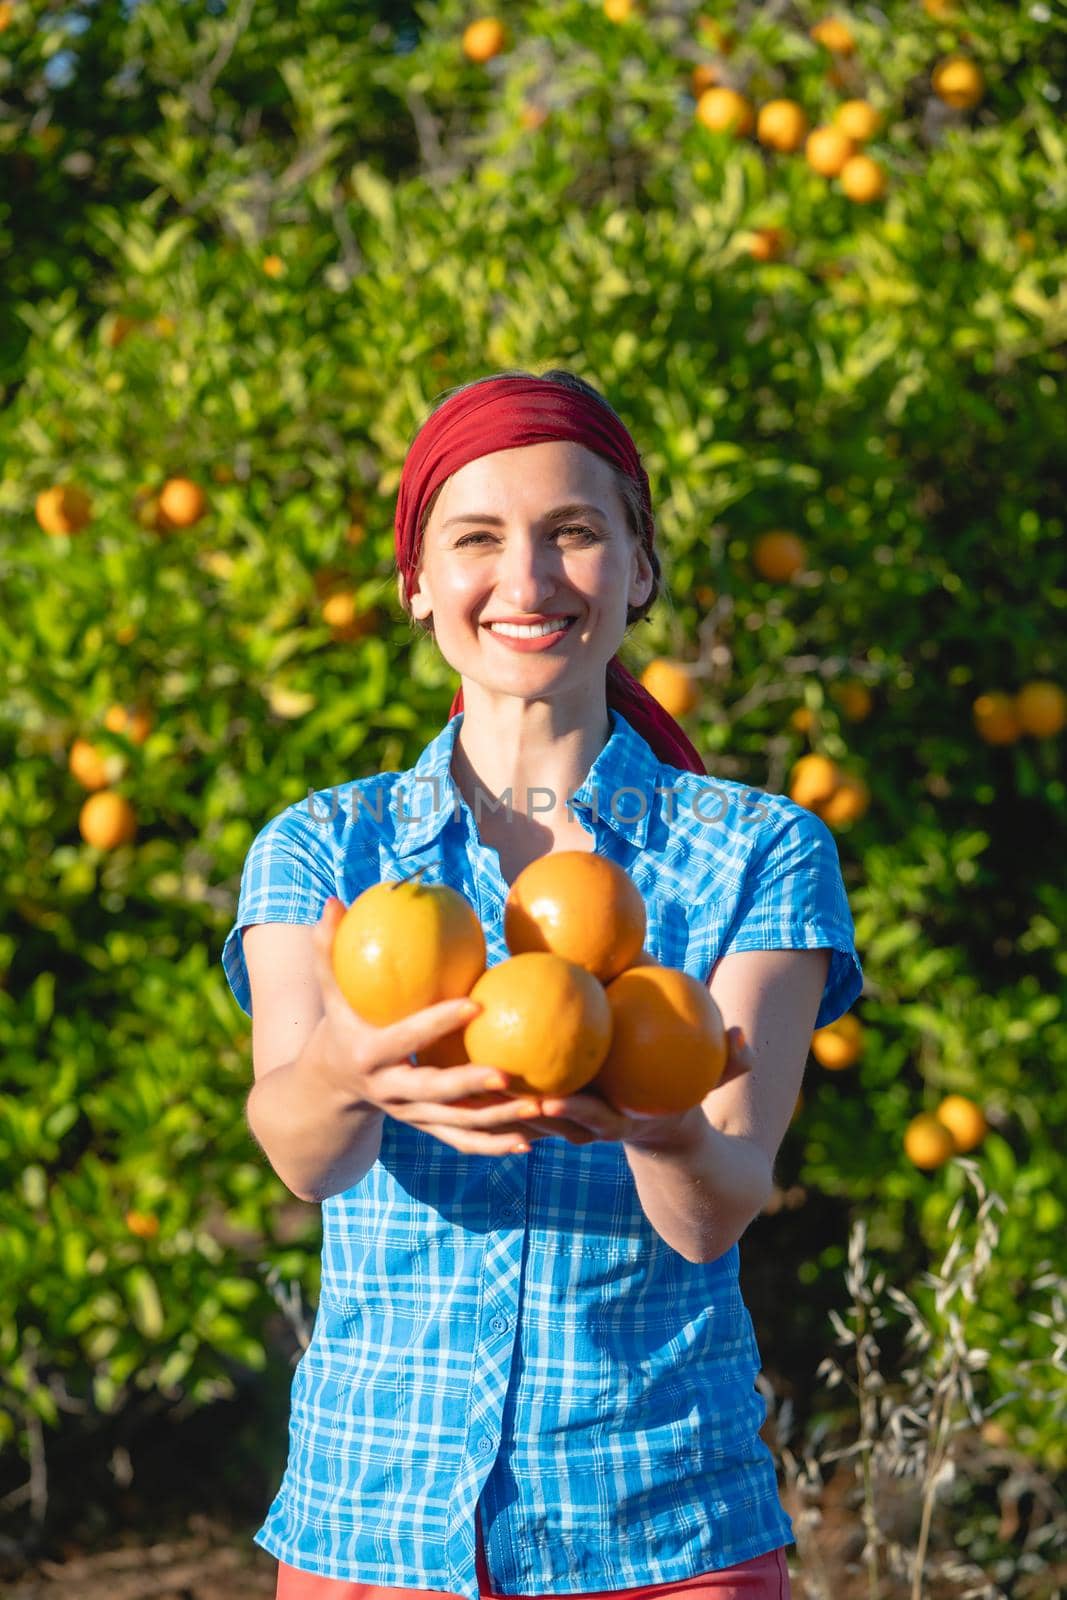 Farmer woman harvesting oranges in her orchard offering her fruit